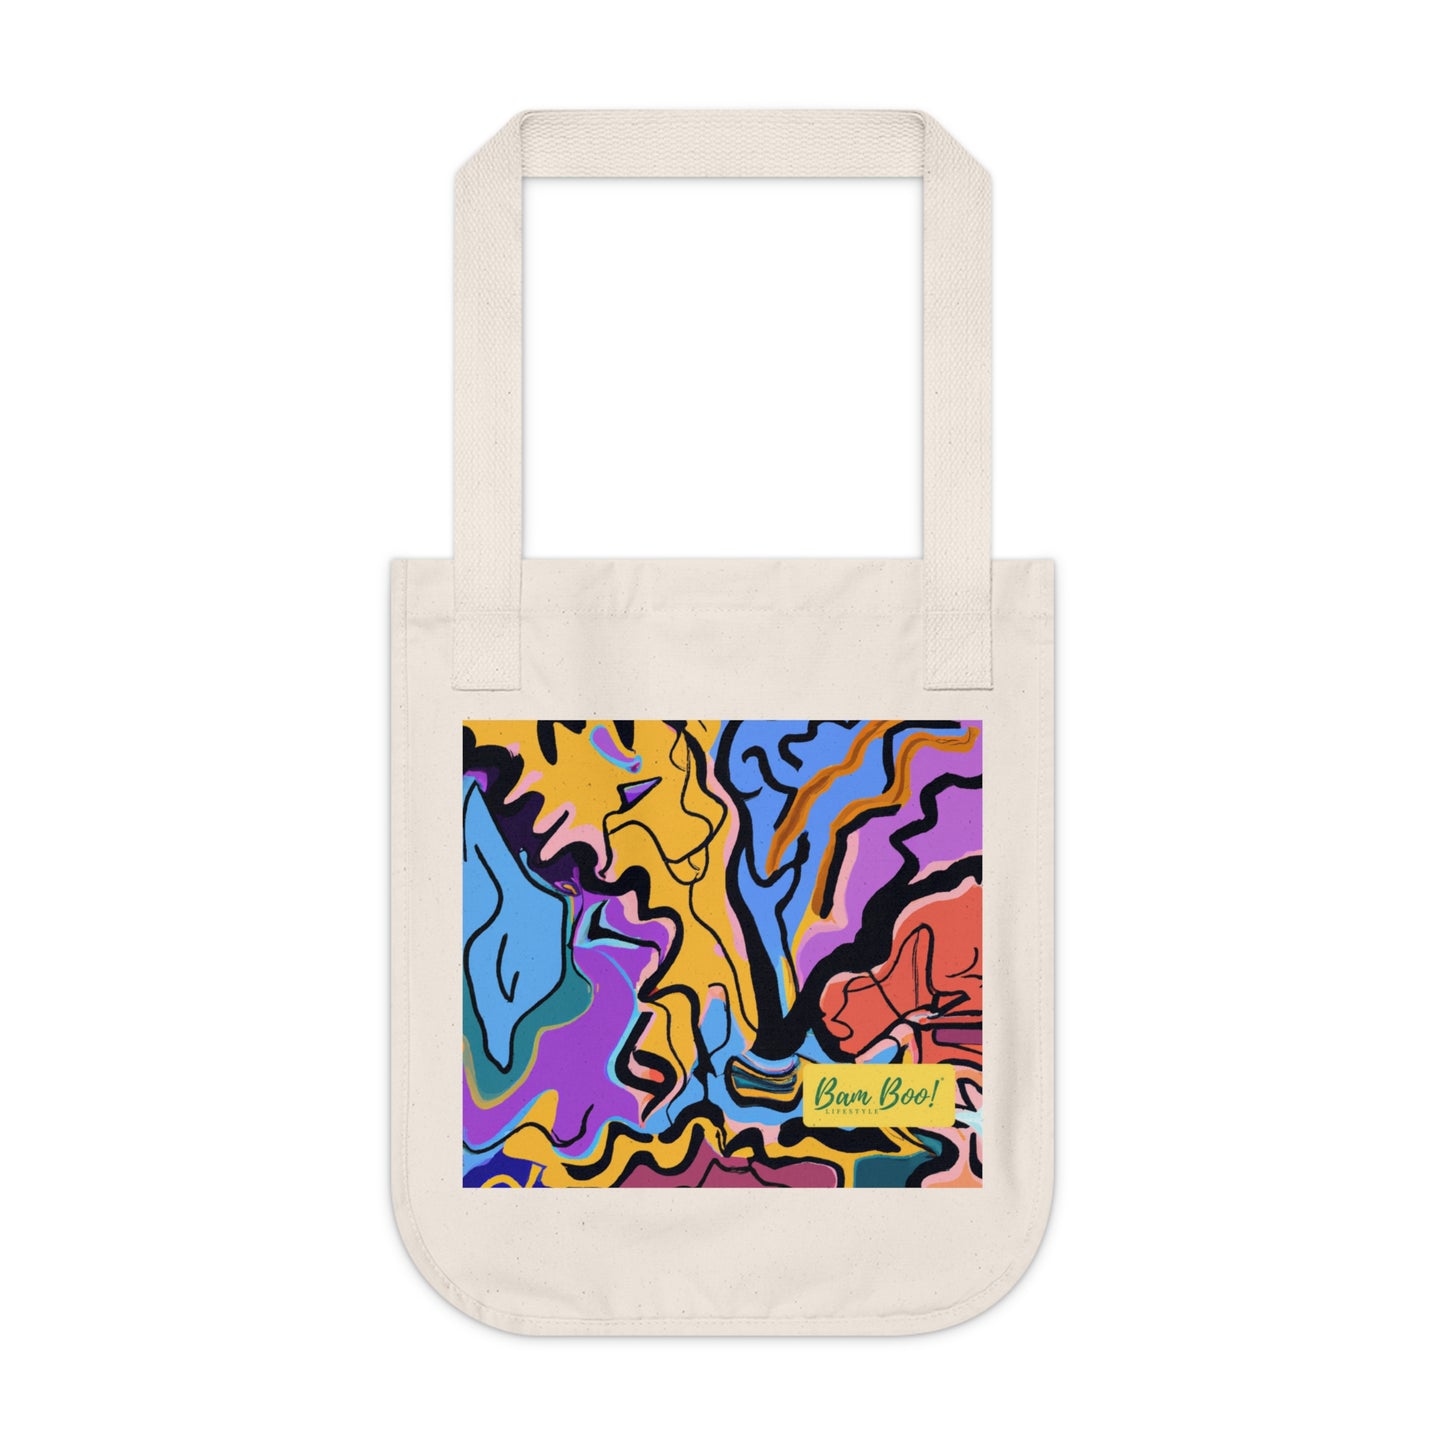 My Transformative Treasures: An Abstract Art Journey - Bam Boo! Lifestyle Eco-friendly Tote Bag